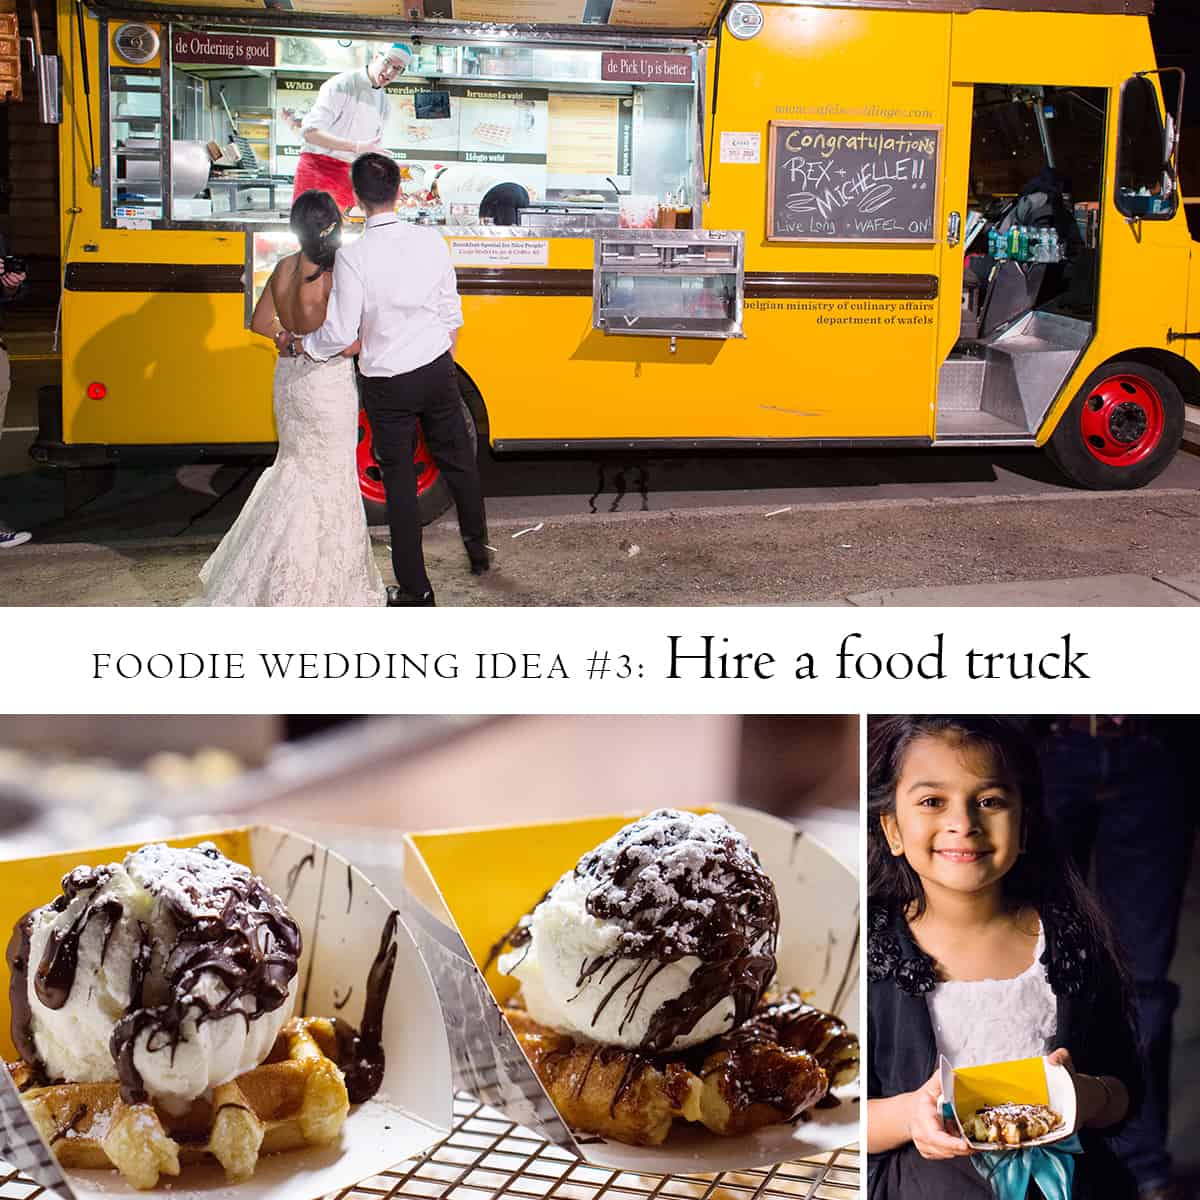 Foodie wedding idea: hire a food truck. NYC's Wafels and Dinges truck photographed by Kyo Morishima